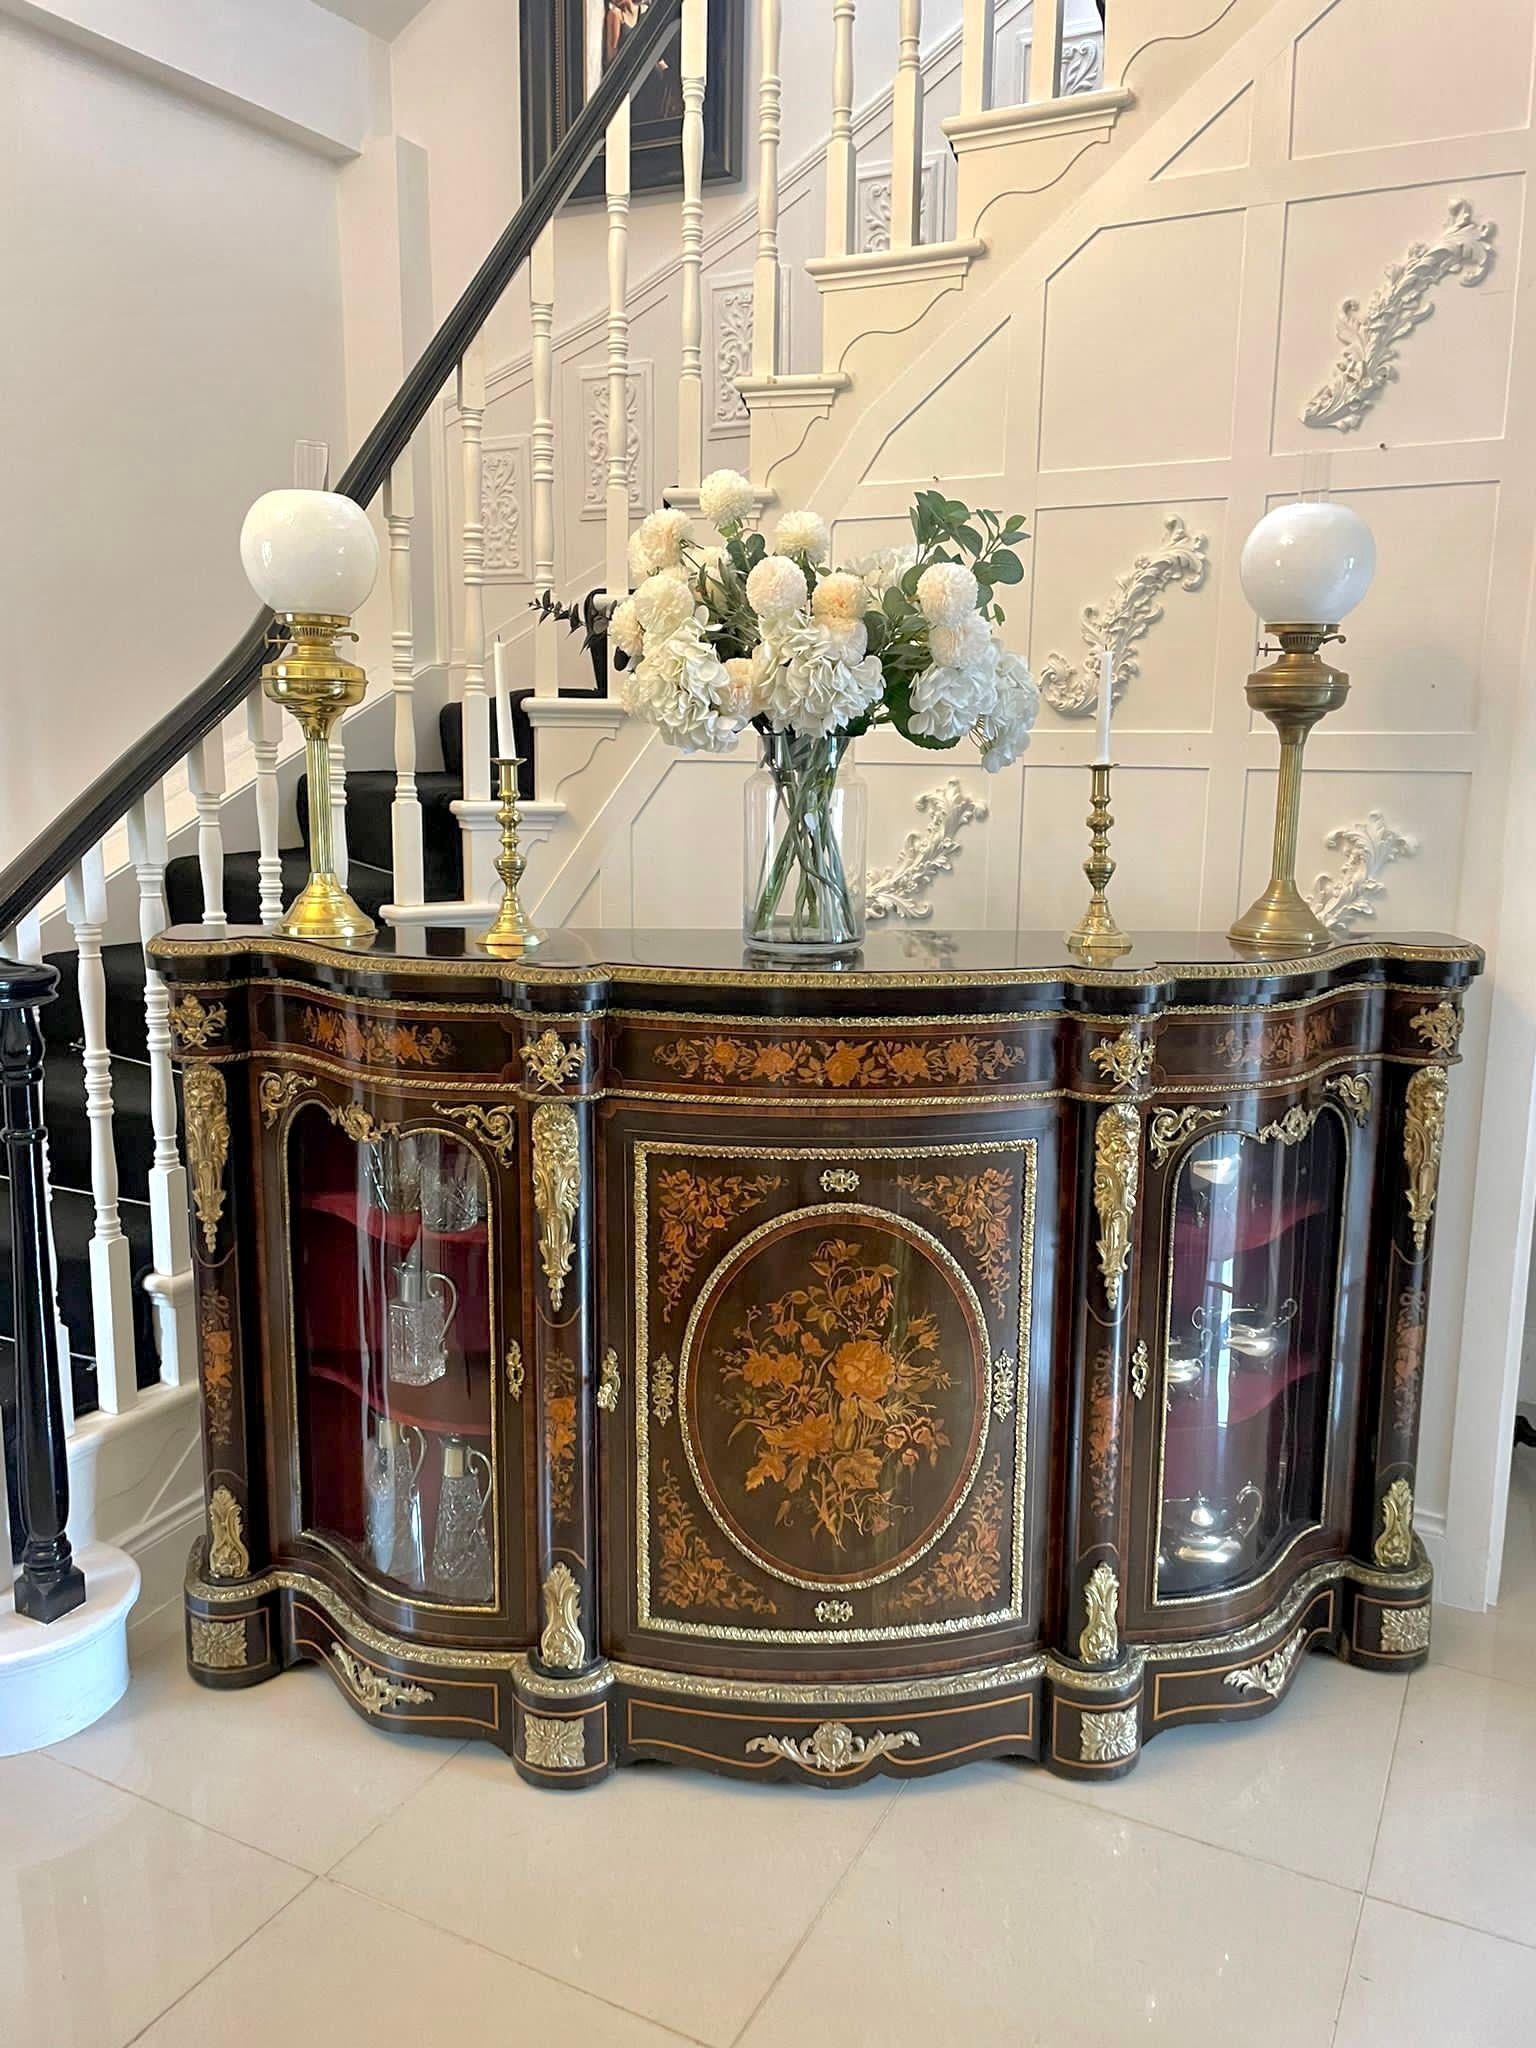 Outstanding quality antique Victorian floral marquetry ormolu mounted serpentine shaped credenza having a serpentine shaped ebonised top with an ornate ormolu edge above a floral marquetry ormolu mounted serpentine shaped frieze. It boasts a